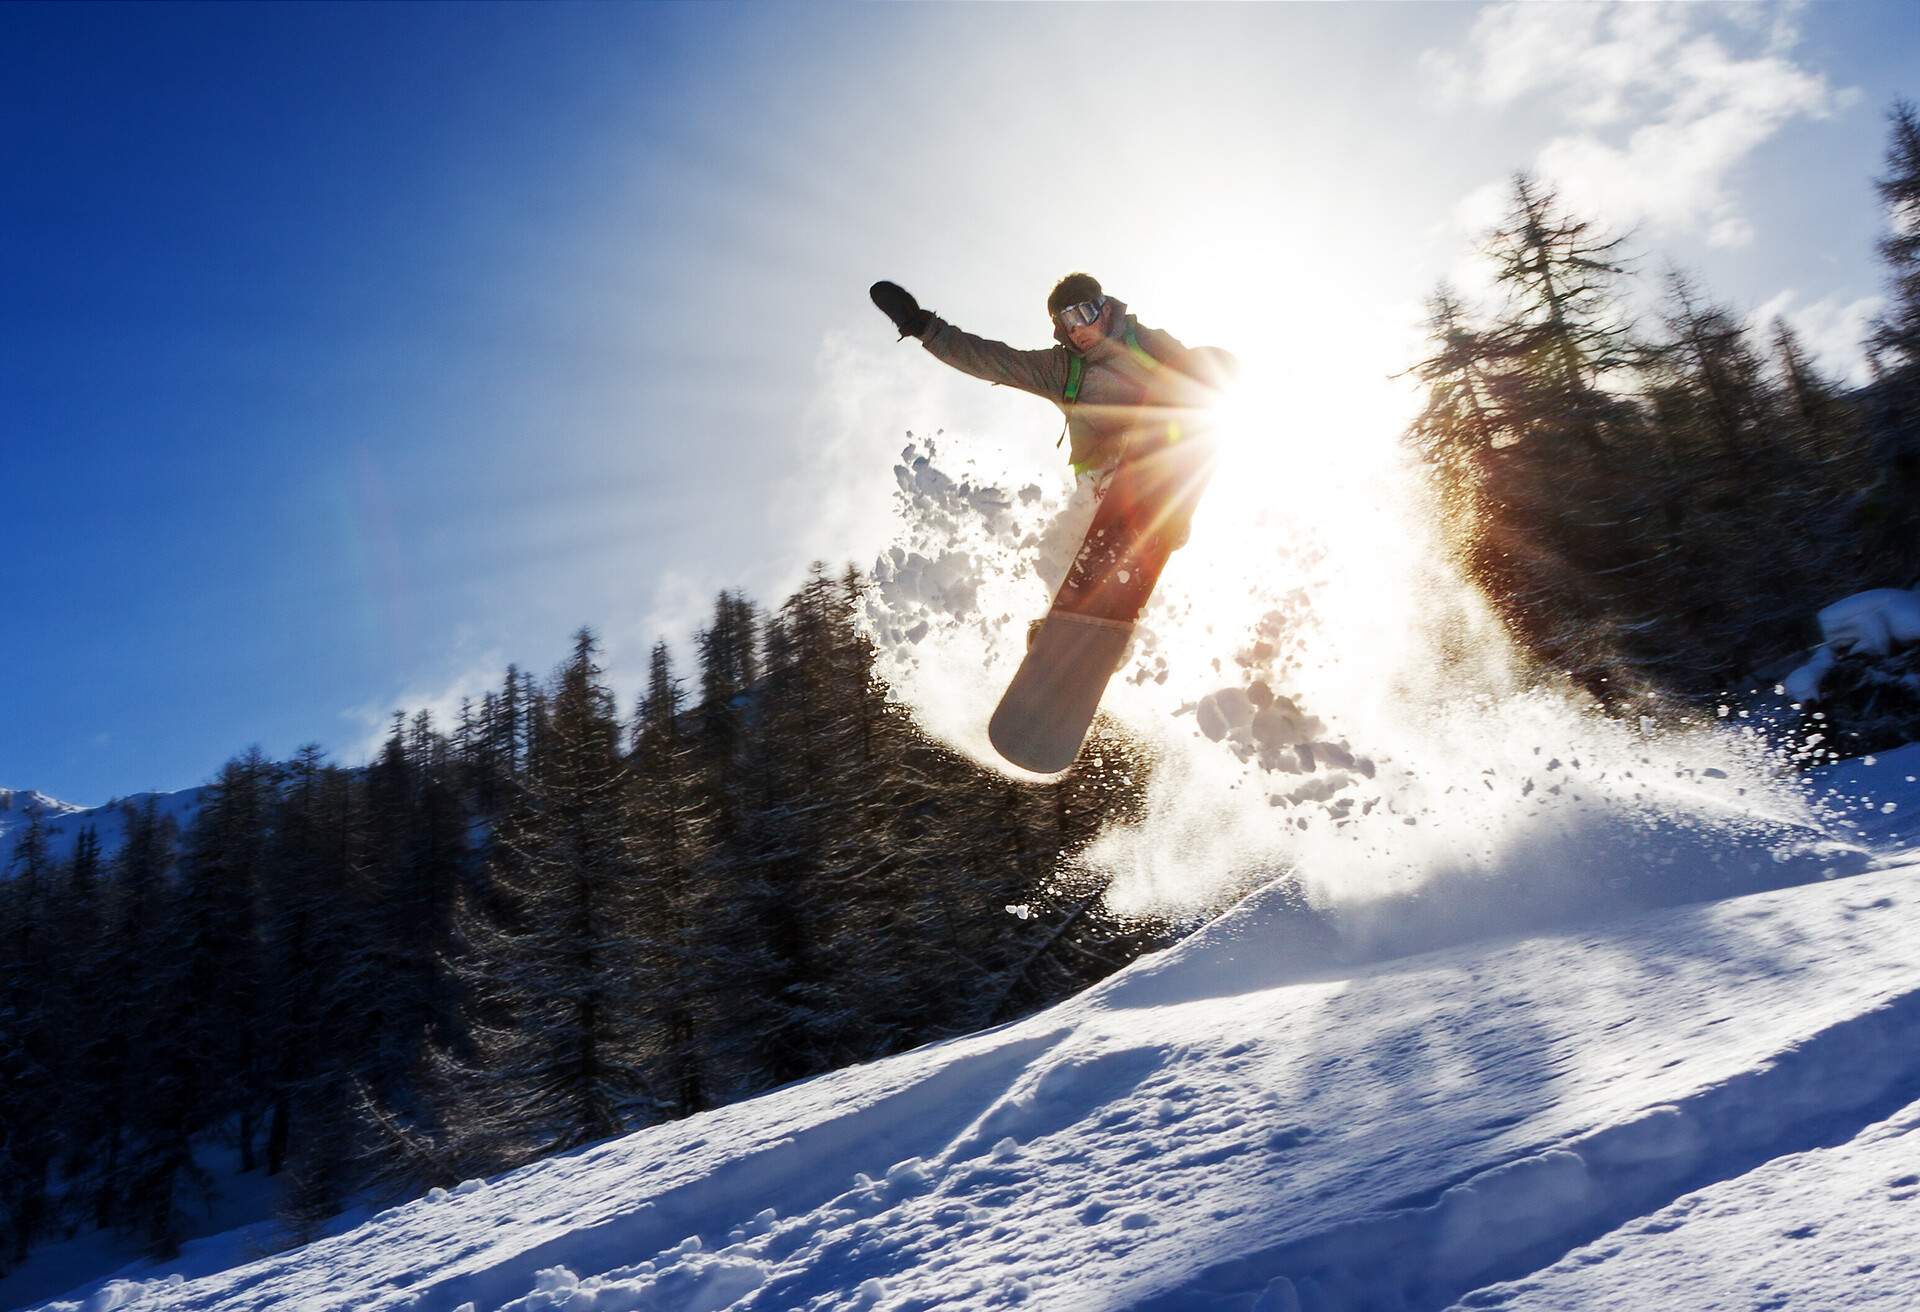 A snowboarder jumping on a snowy ski slope as the sun shines through the trees in the background.